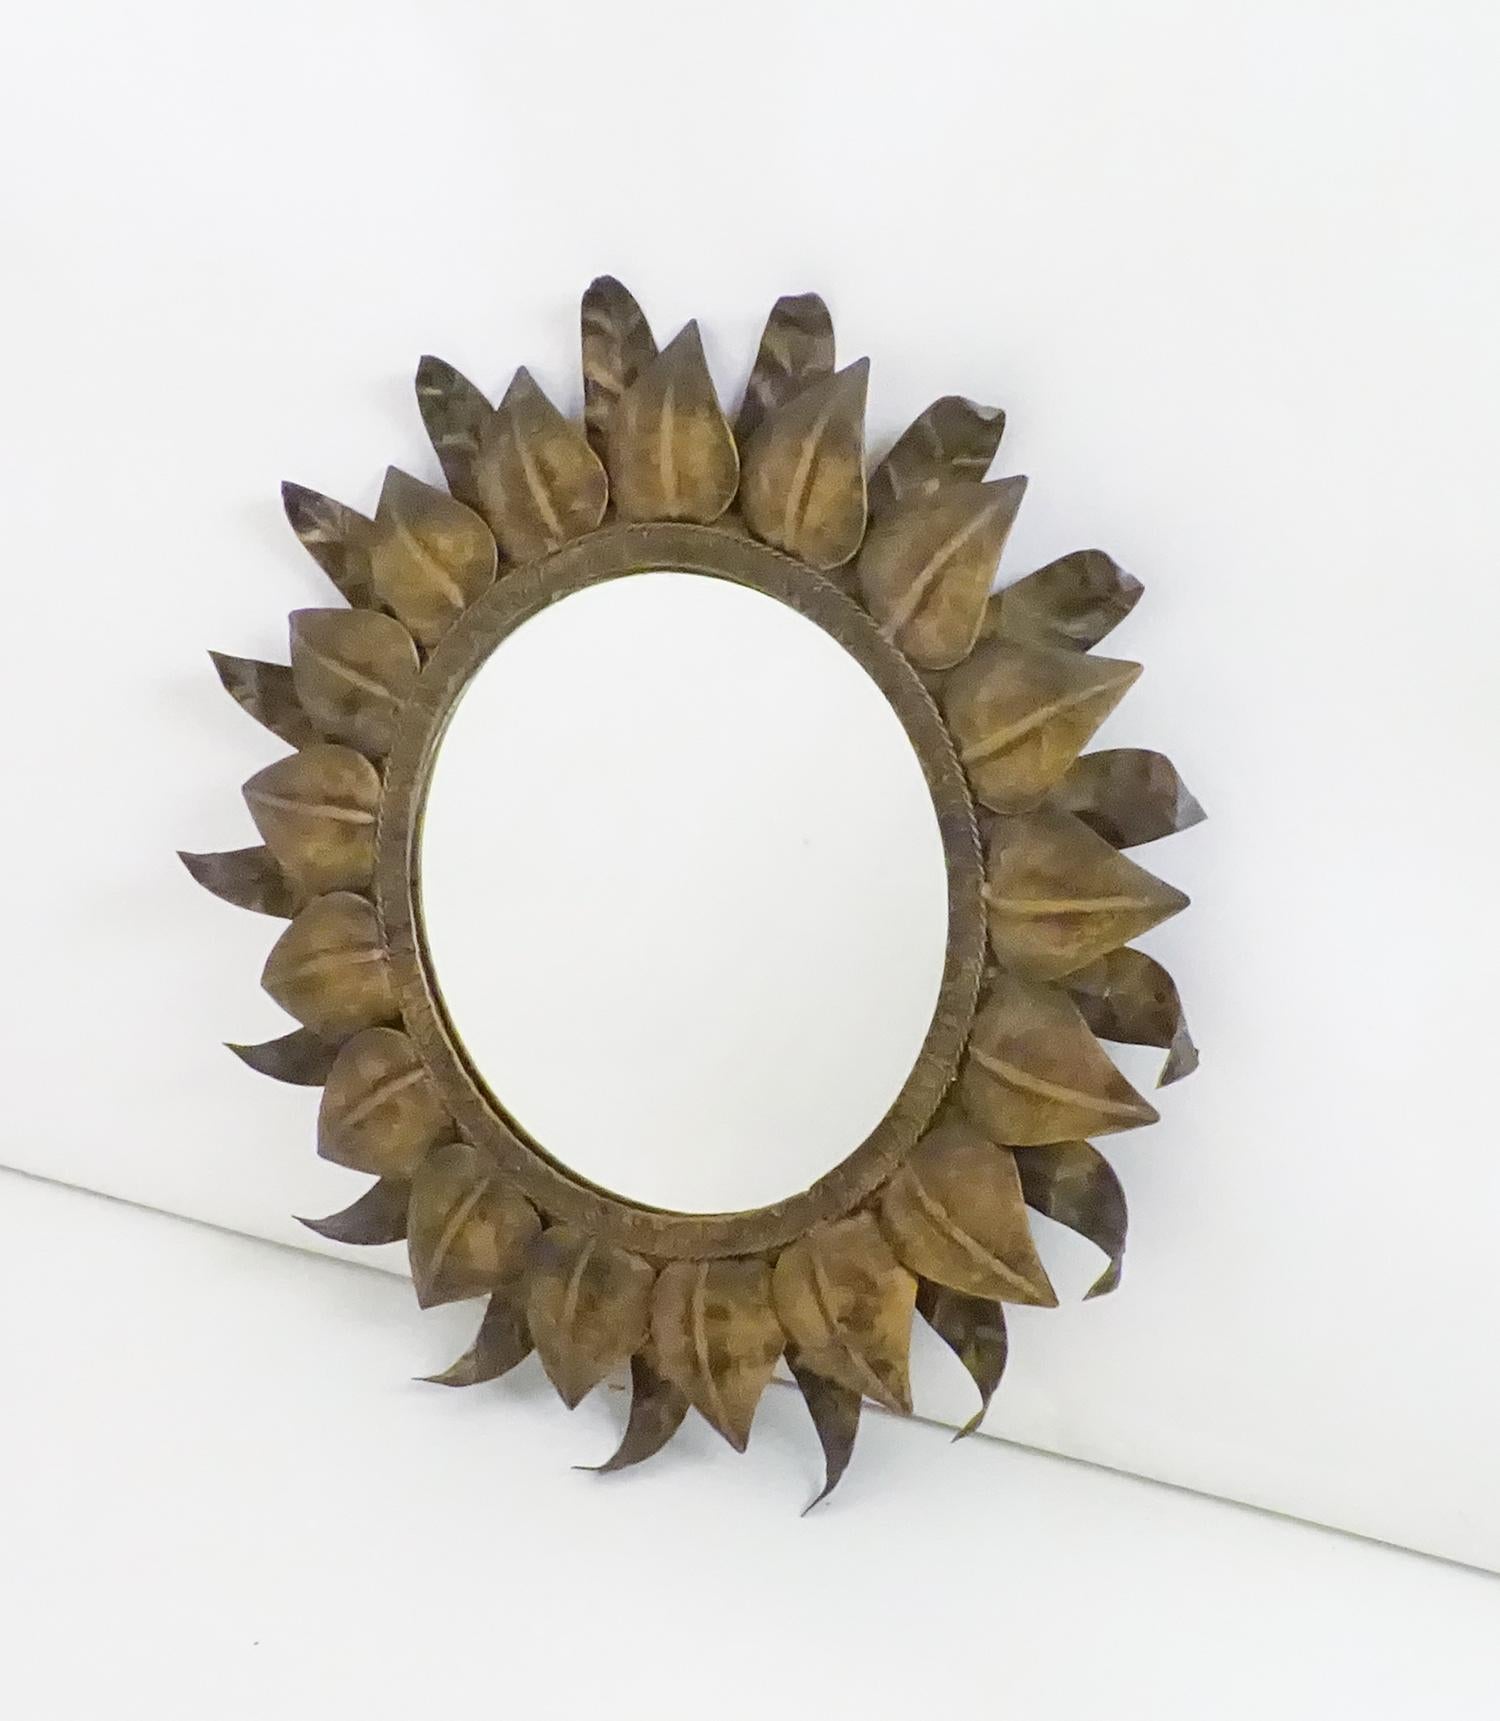 Sun-shaped mirror in wrought iron 1960's.
Two lines of leaves, plant decoration in the form of sun rays that give it depth.
Of Spanish origin, made in an old forge in Cehegín, Murcia.
The moon is in very good condition.
Total diameter measurements